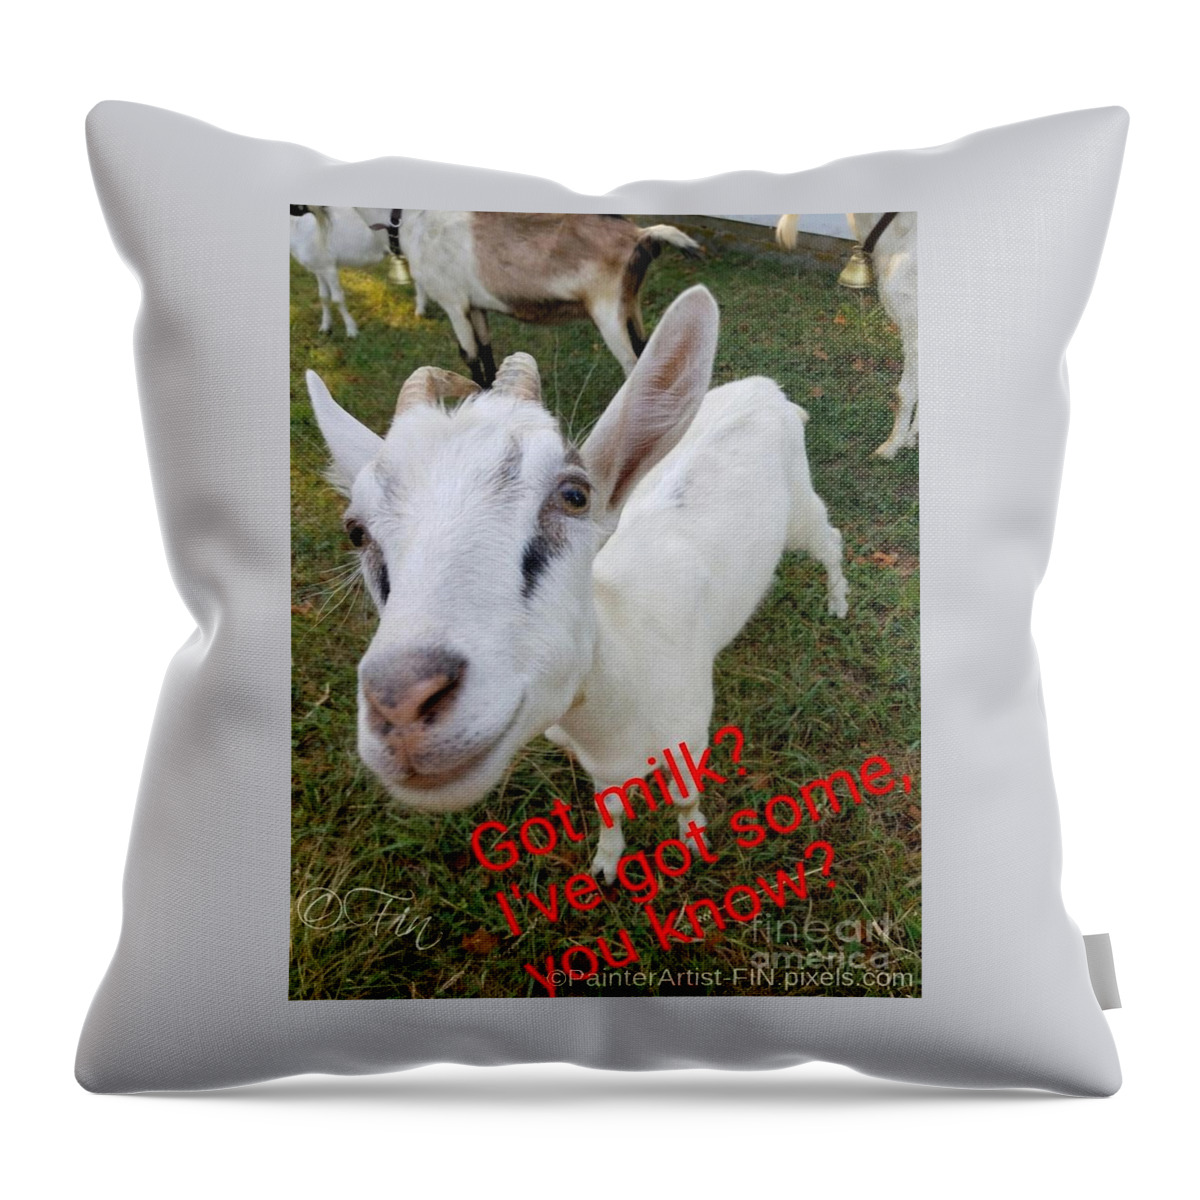 Everything Natural Goat Farm Throw Pillow featuring the photograph Blizzard by PainterArtist FIN